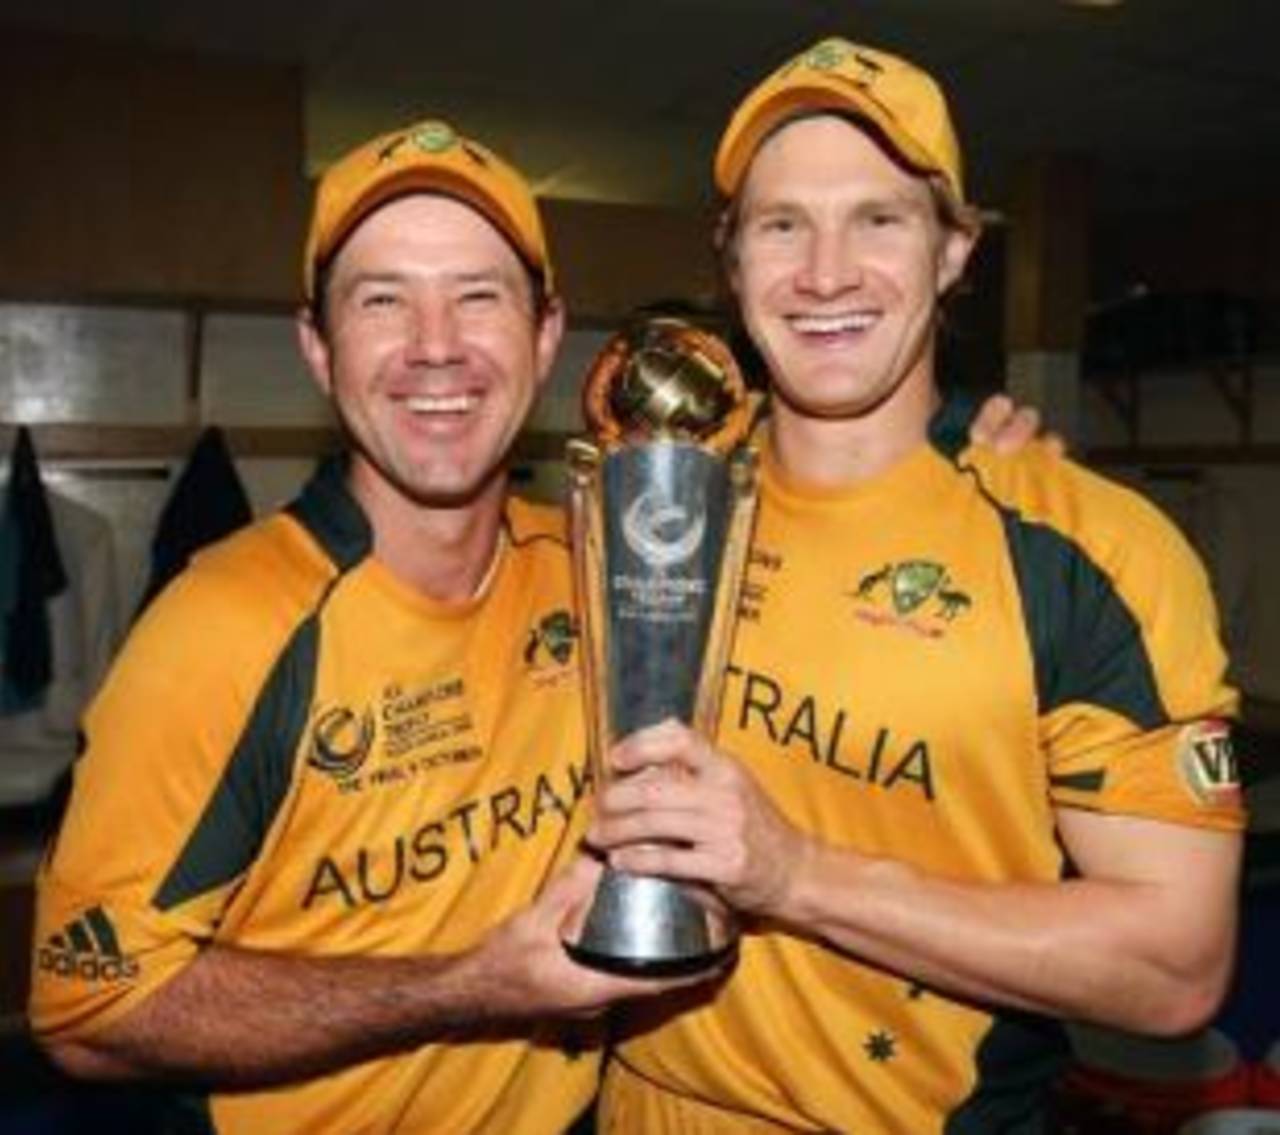 Ricky Ponting and Shane Watson celebrate with the Champions Trophy, Australia v New Zealand, Champions Trophy final, Centurion, October 5, 2009